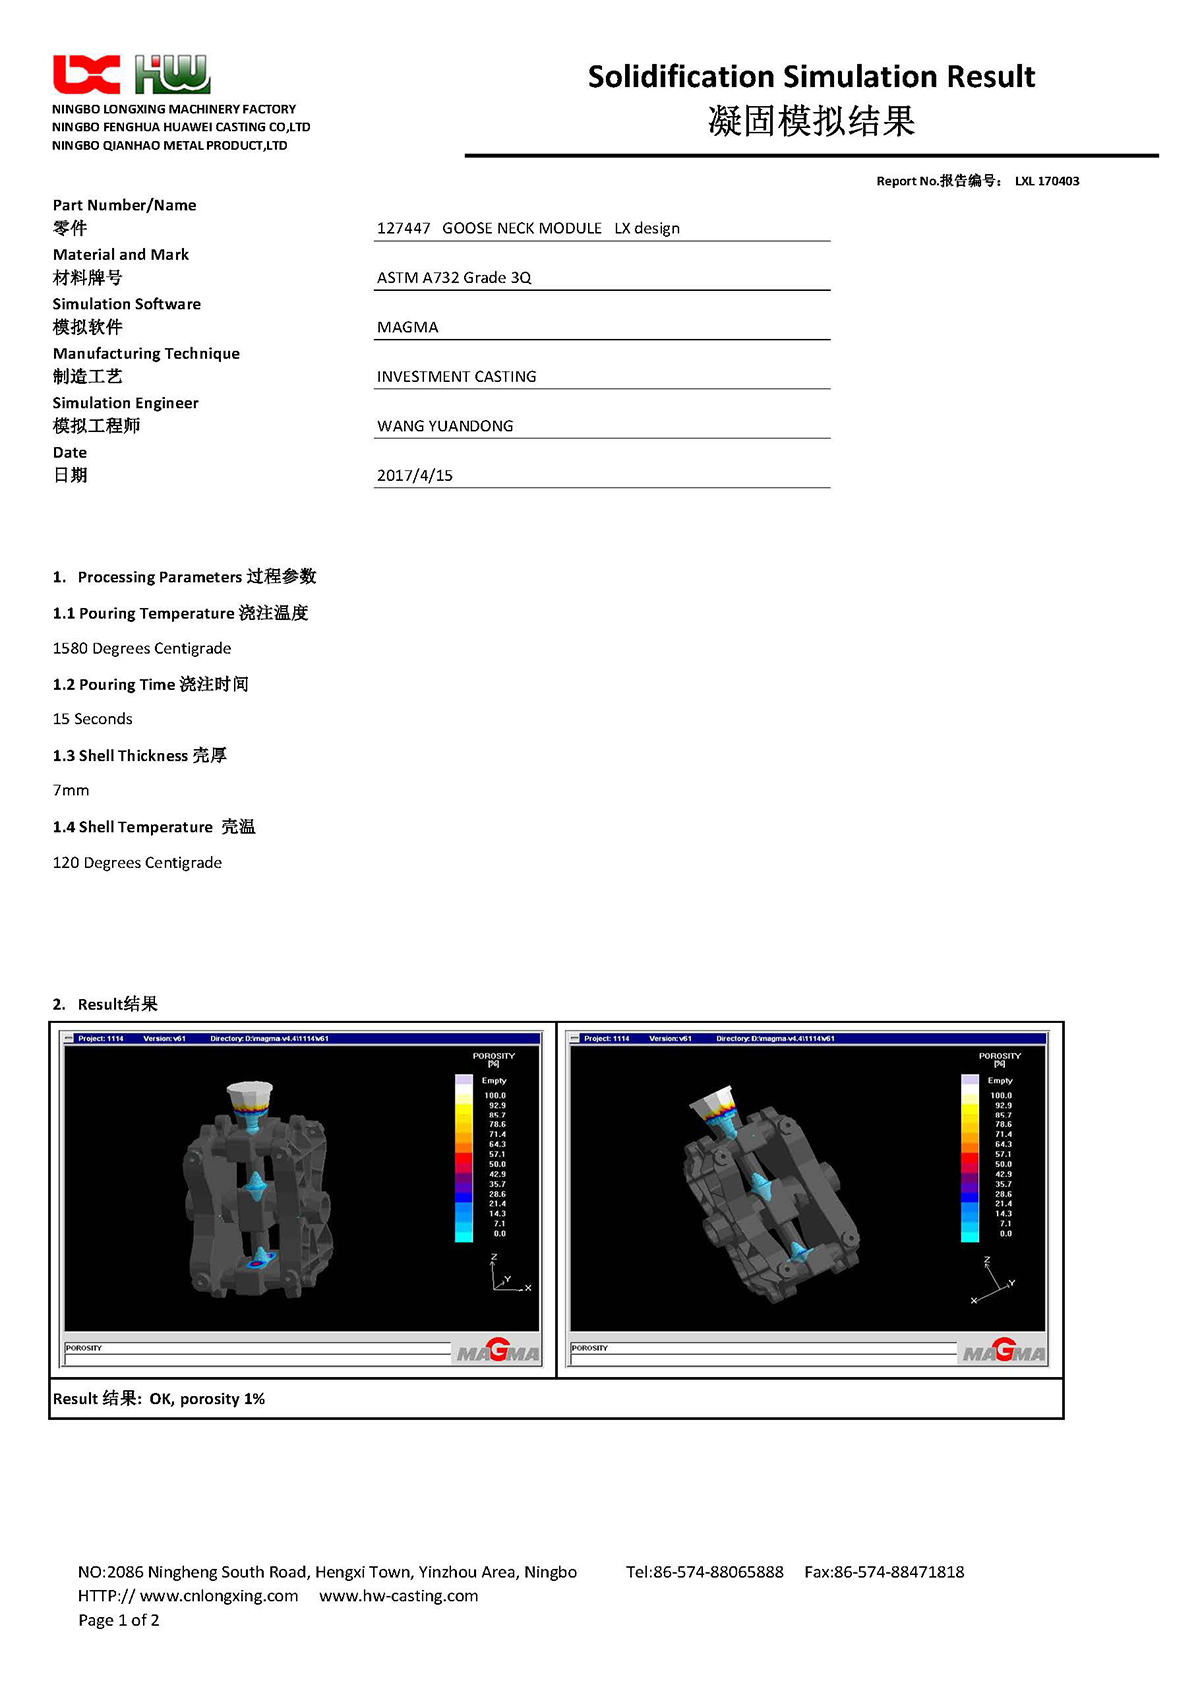 Solidification Simulation Report(图1)